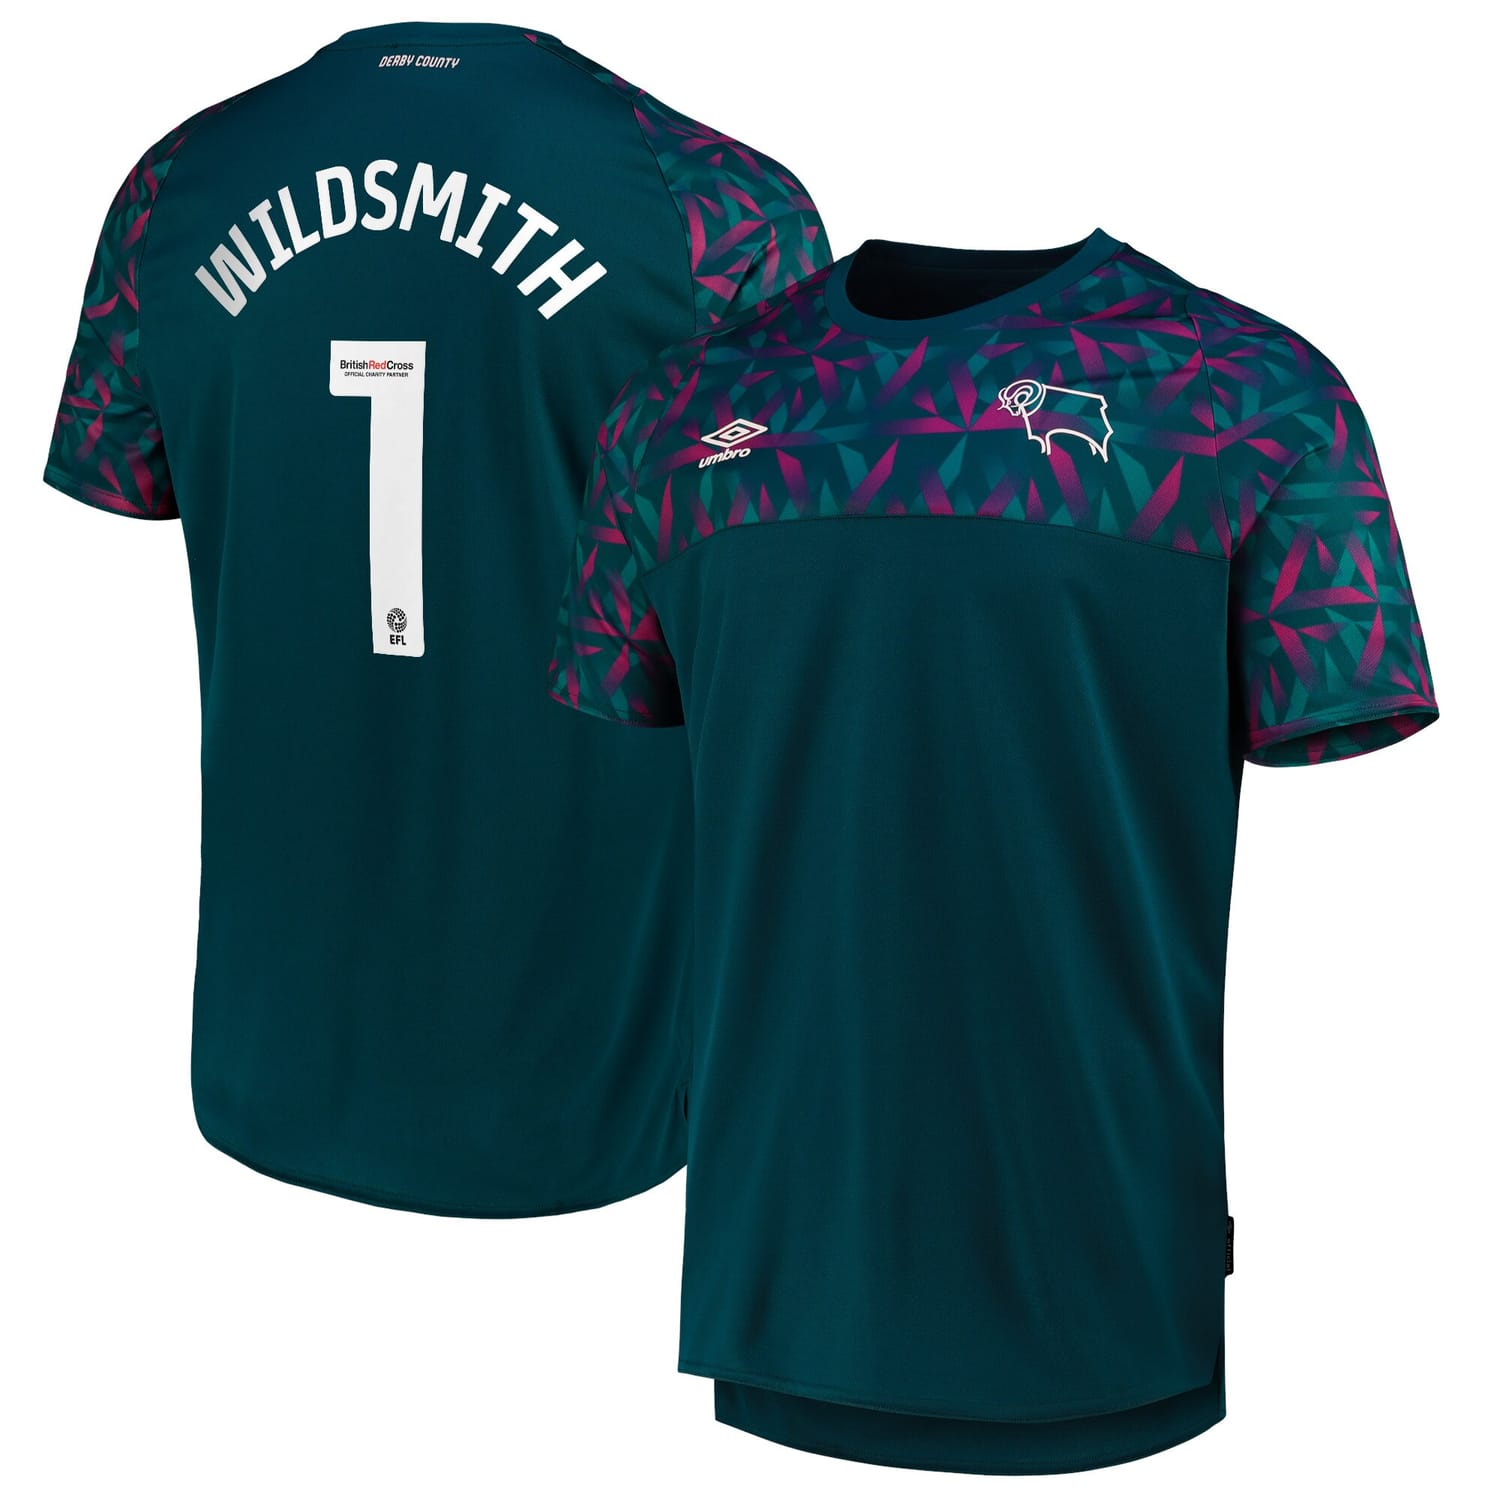 EFL League One Derby County Home Goalkeeper Jersey Shirt 2022-23 player Wildsmith 1 printing for Men